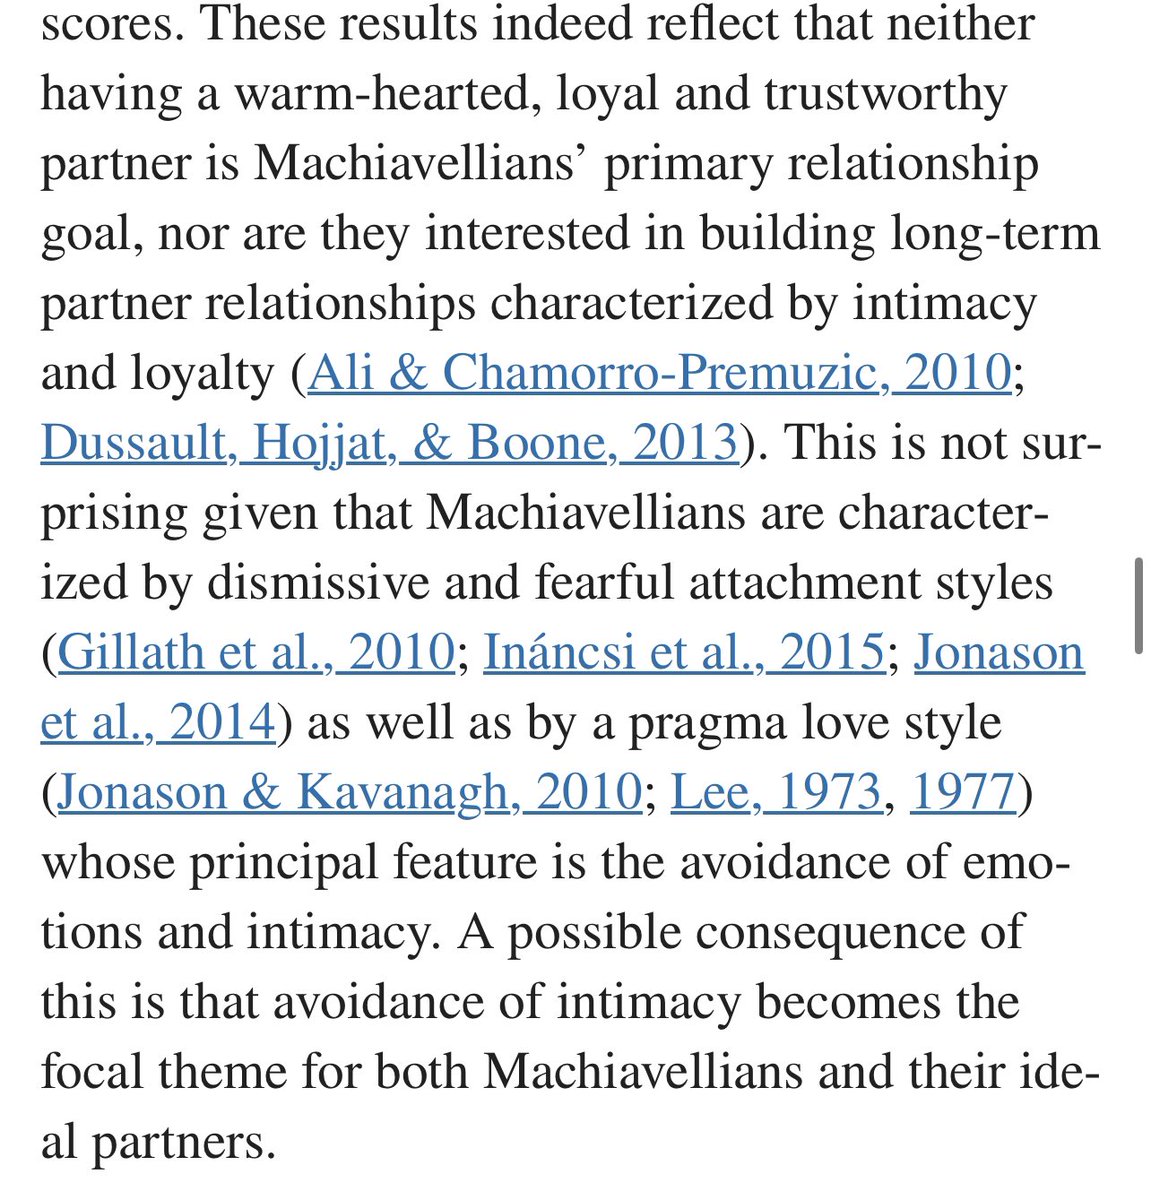 “Neither having a warm-hearted, loyal and trustworthy partner is Machiavellians’ primary relationship goal, nor are they interested in building long-term partner relationships characterized by intimacy and loyalty.”